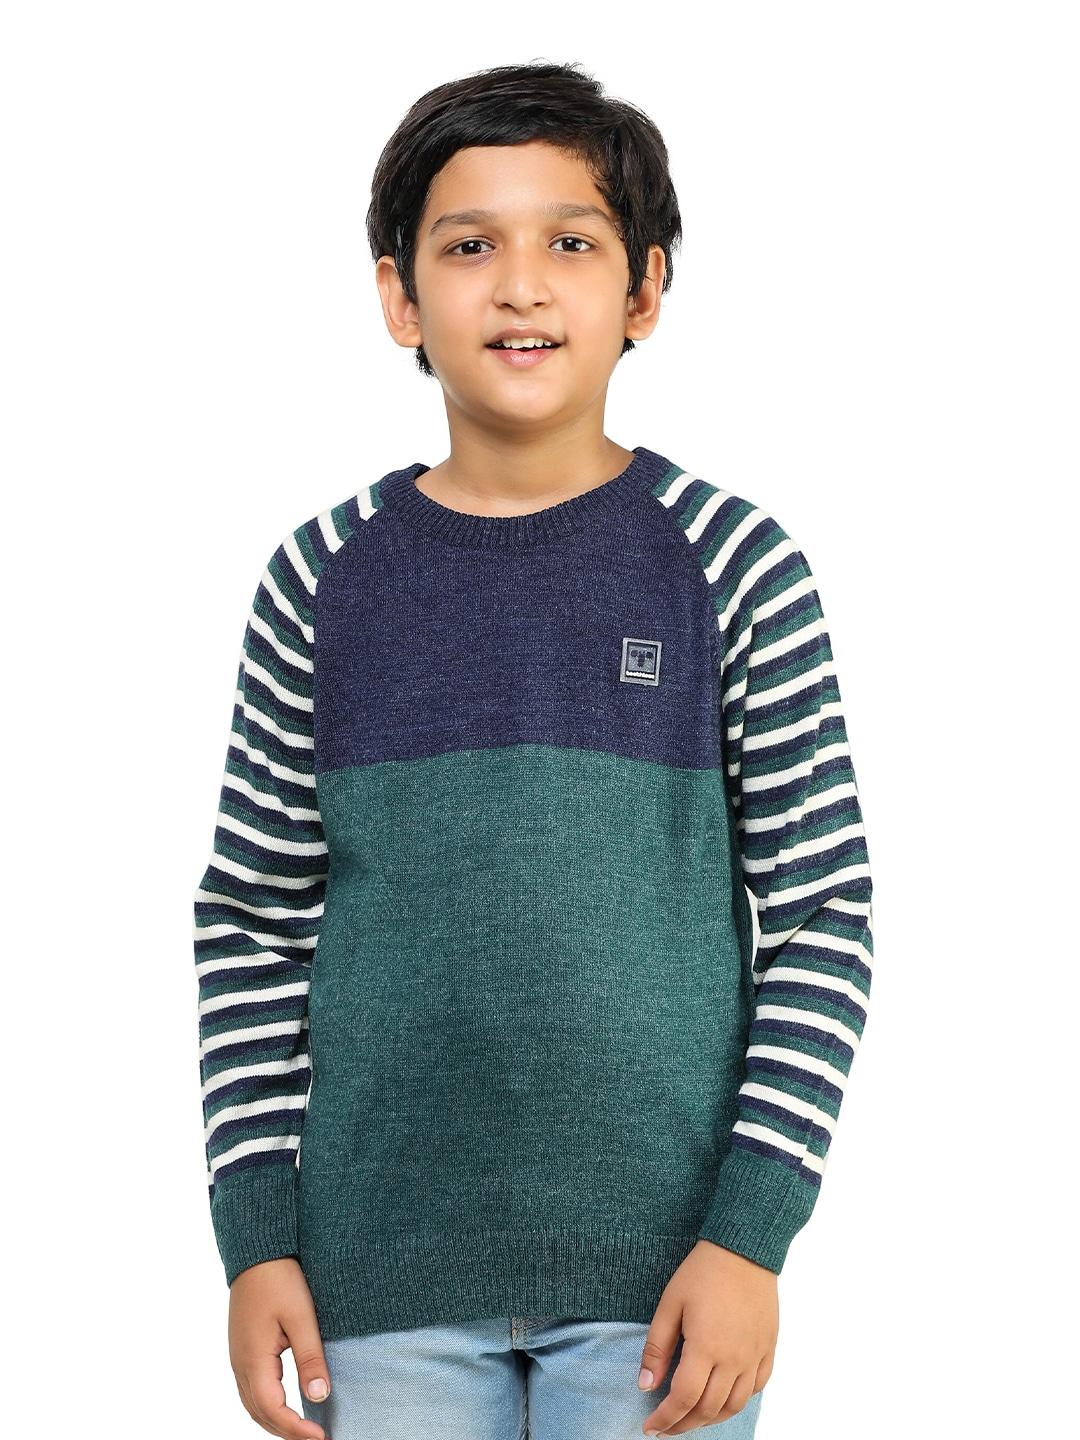 toothless-boys-blue-green-pullover-sweater